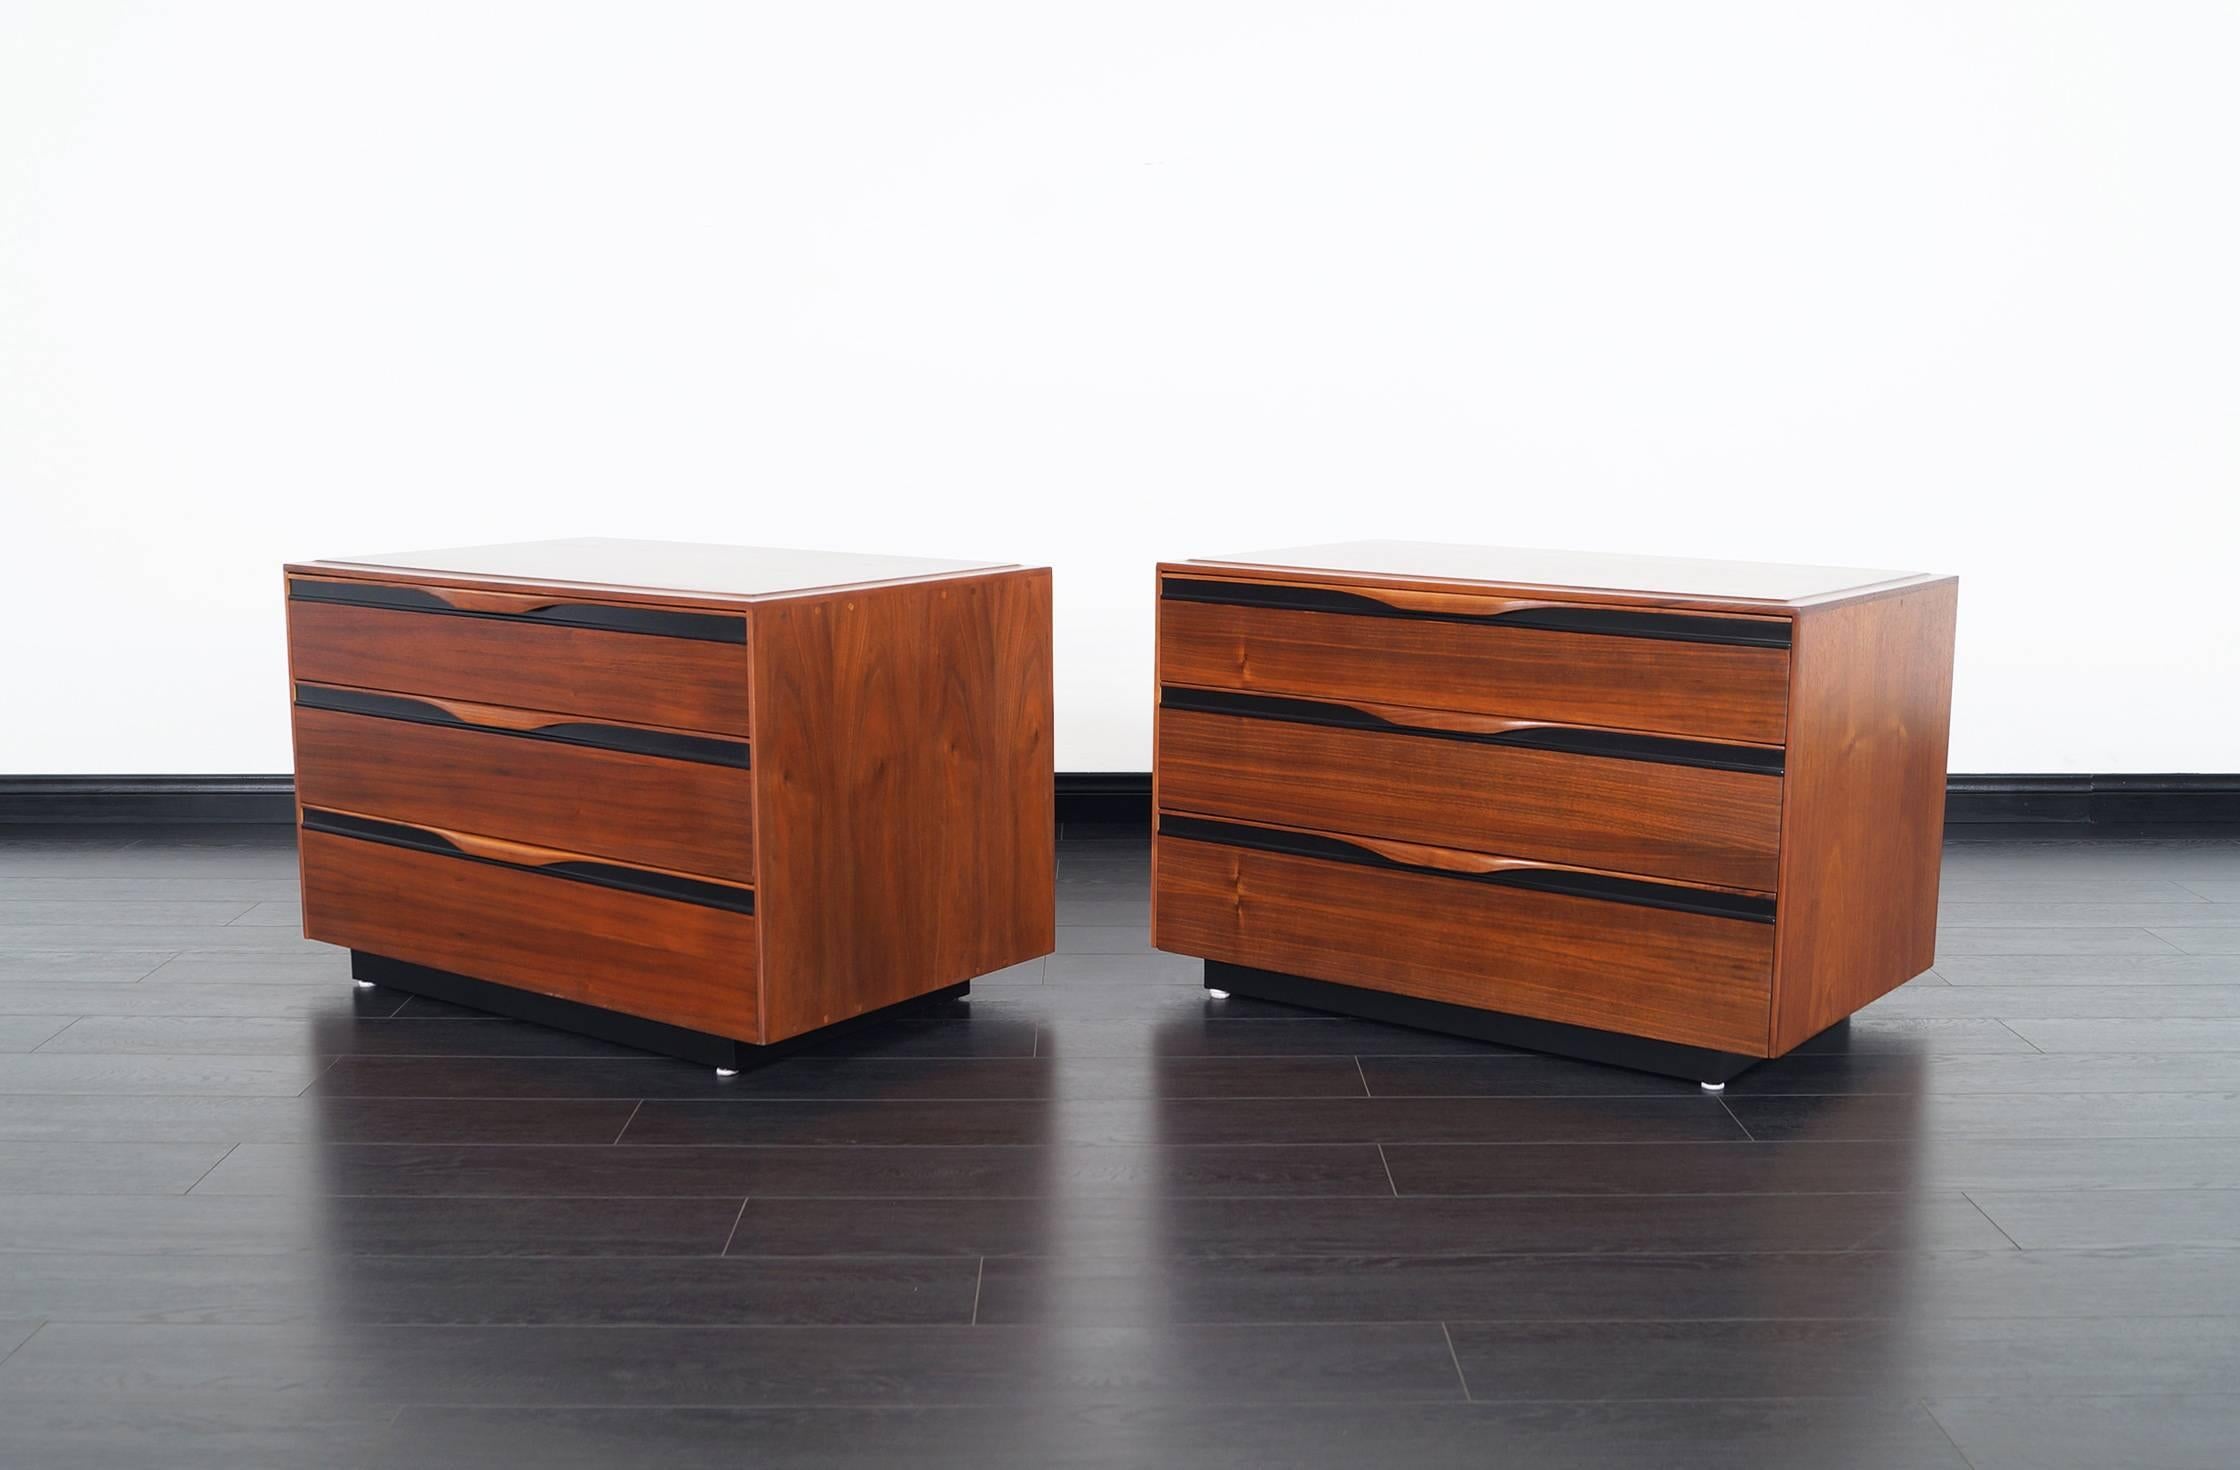 Pair of wonderful midcentury chest of drawers designed by John Kapel for Glenn of California in the United States. Each chest has three pull-out drawers with sculptural pulls.